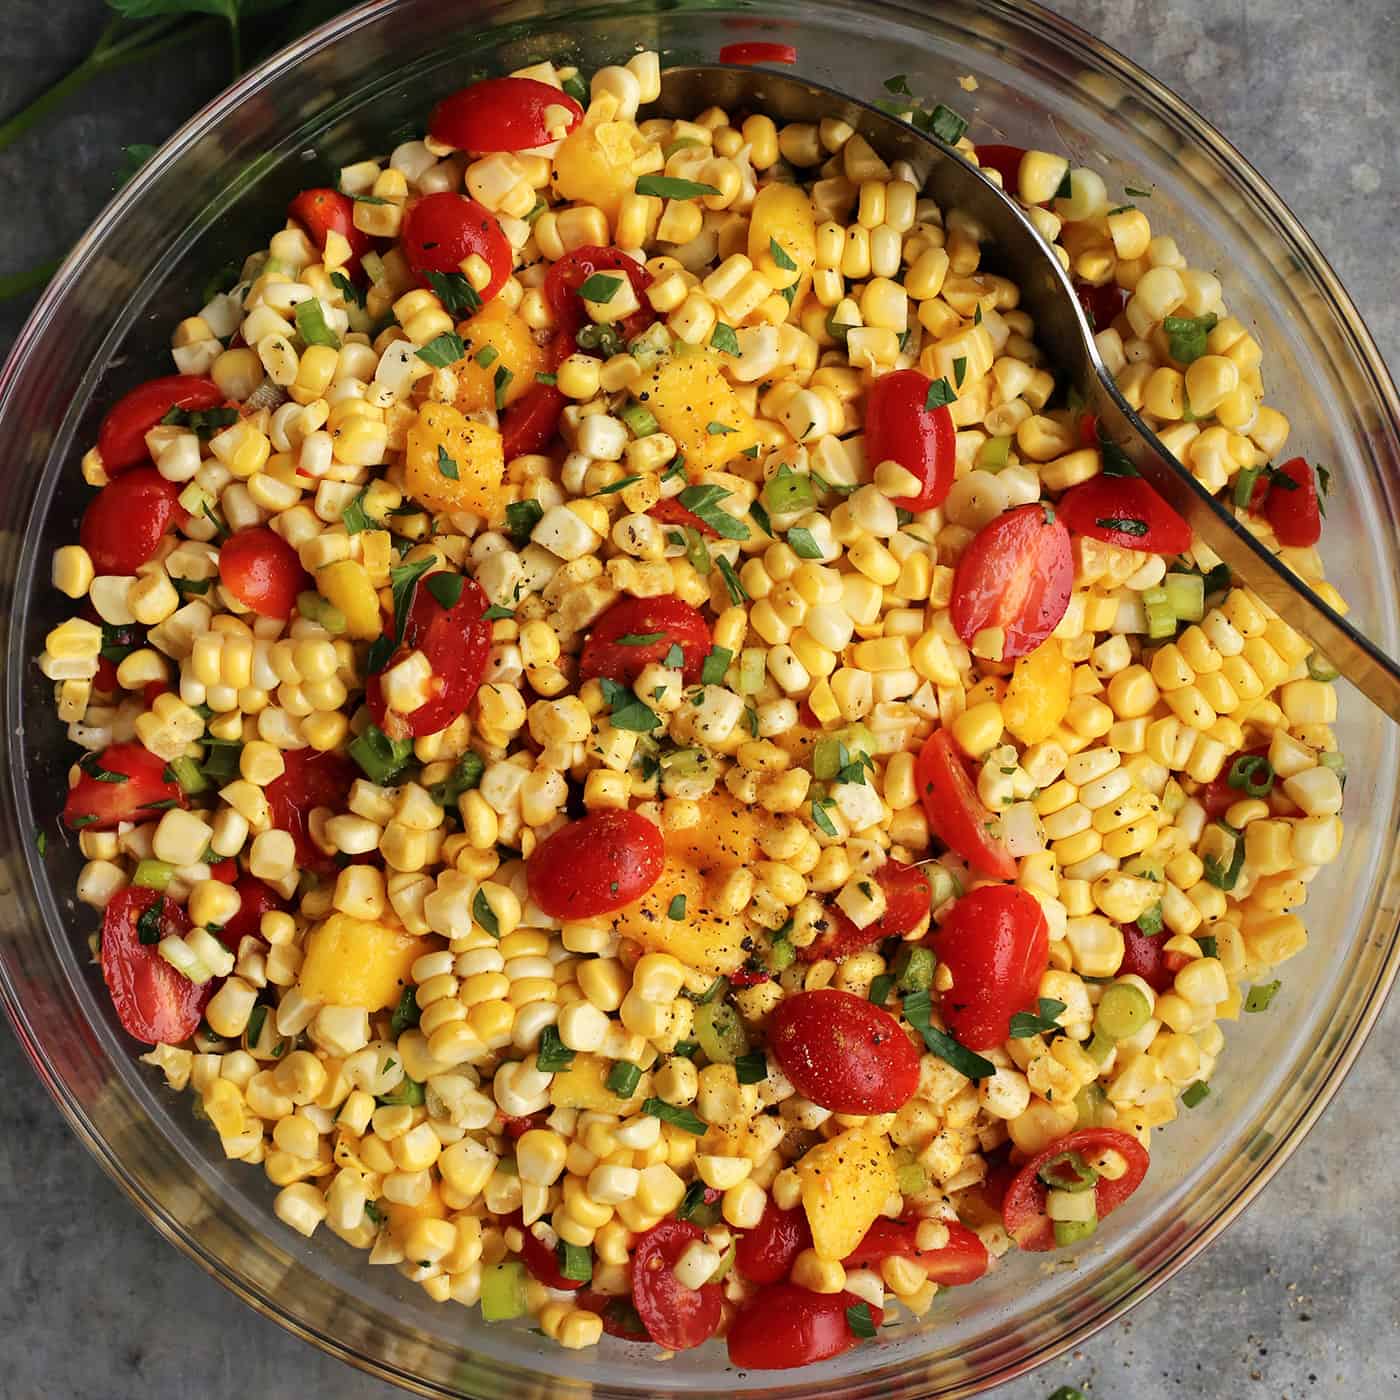 Overhead view of corn and tomato salad in a glass bowl